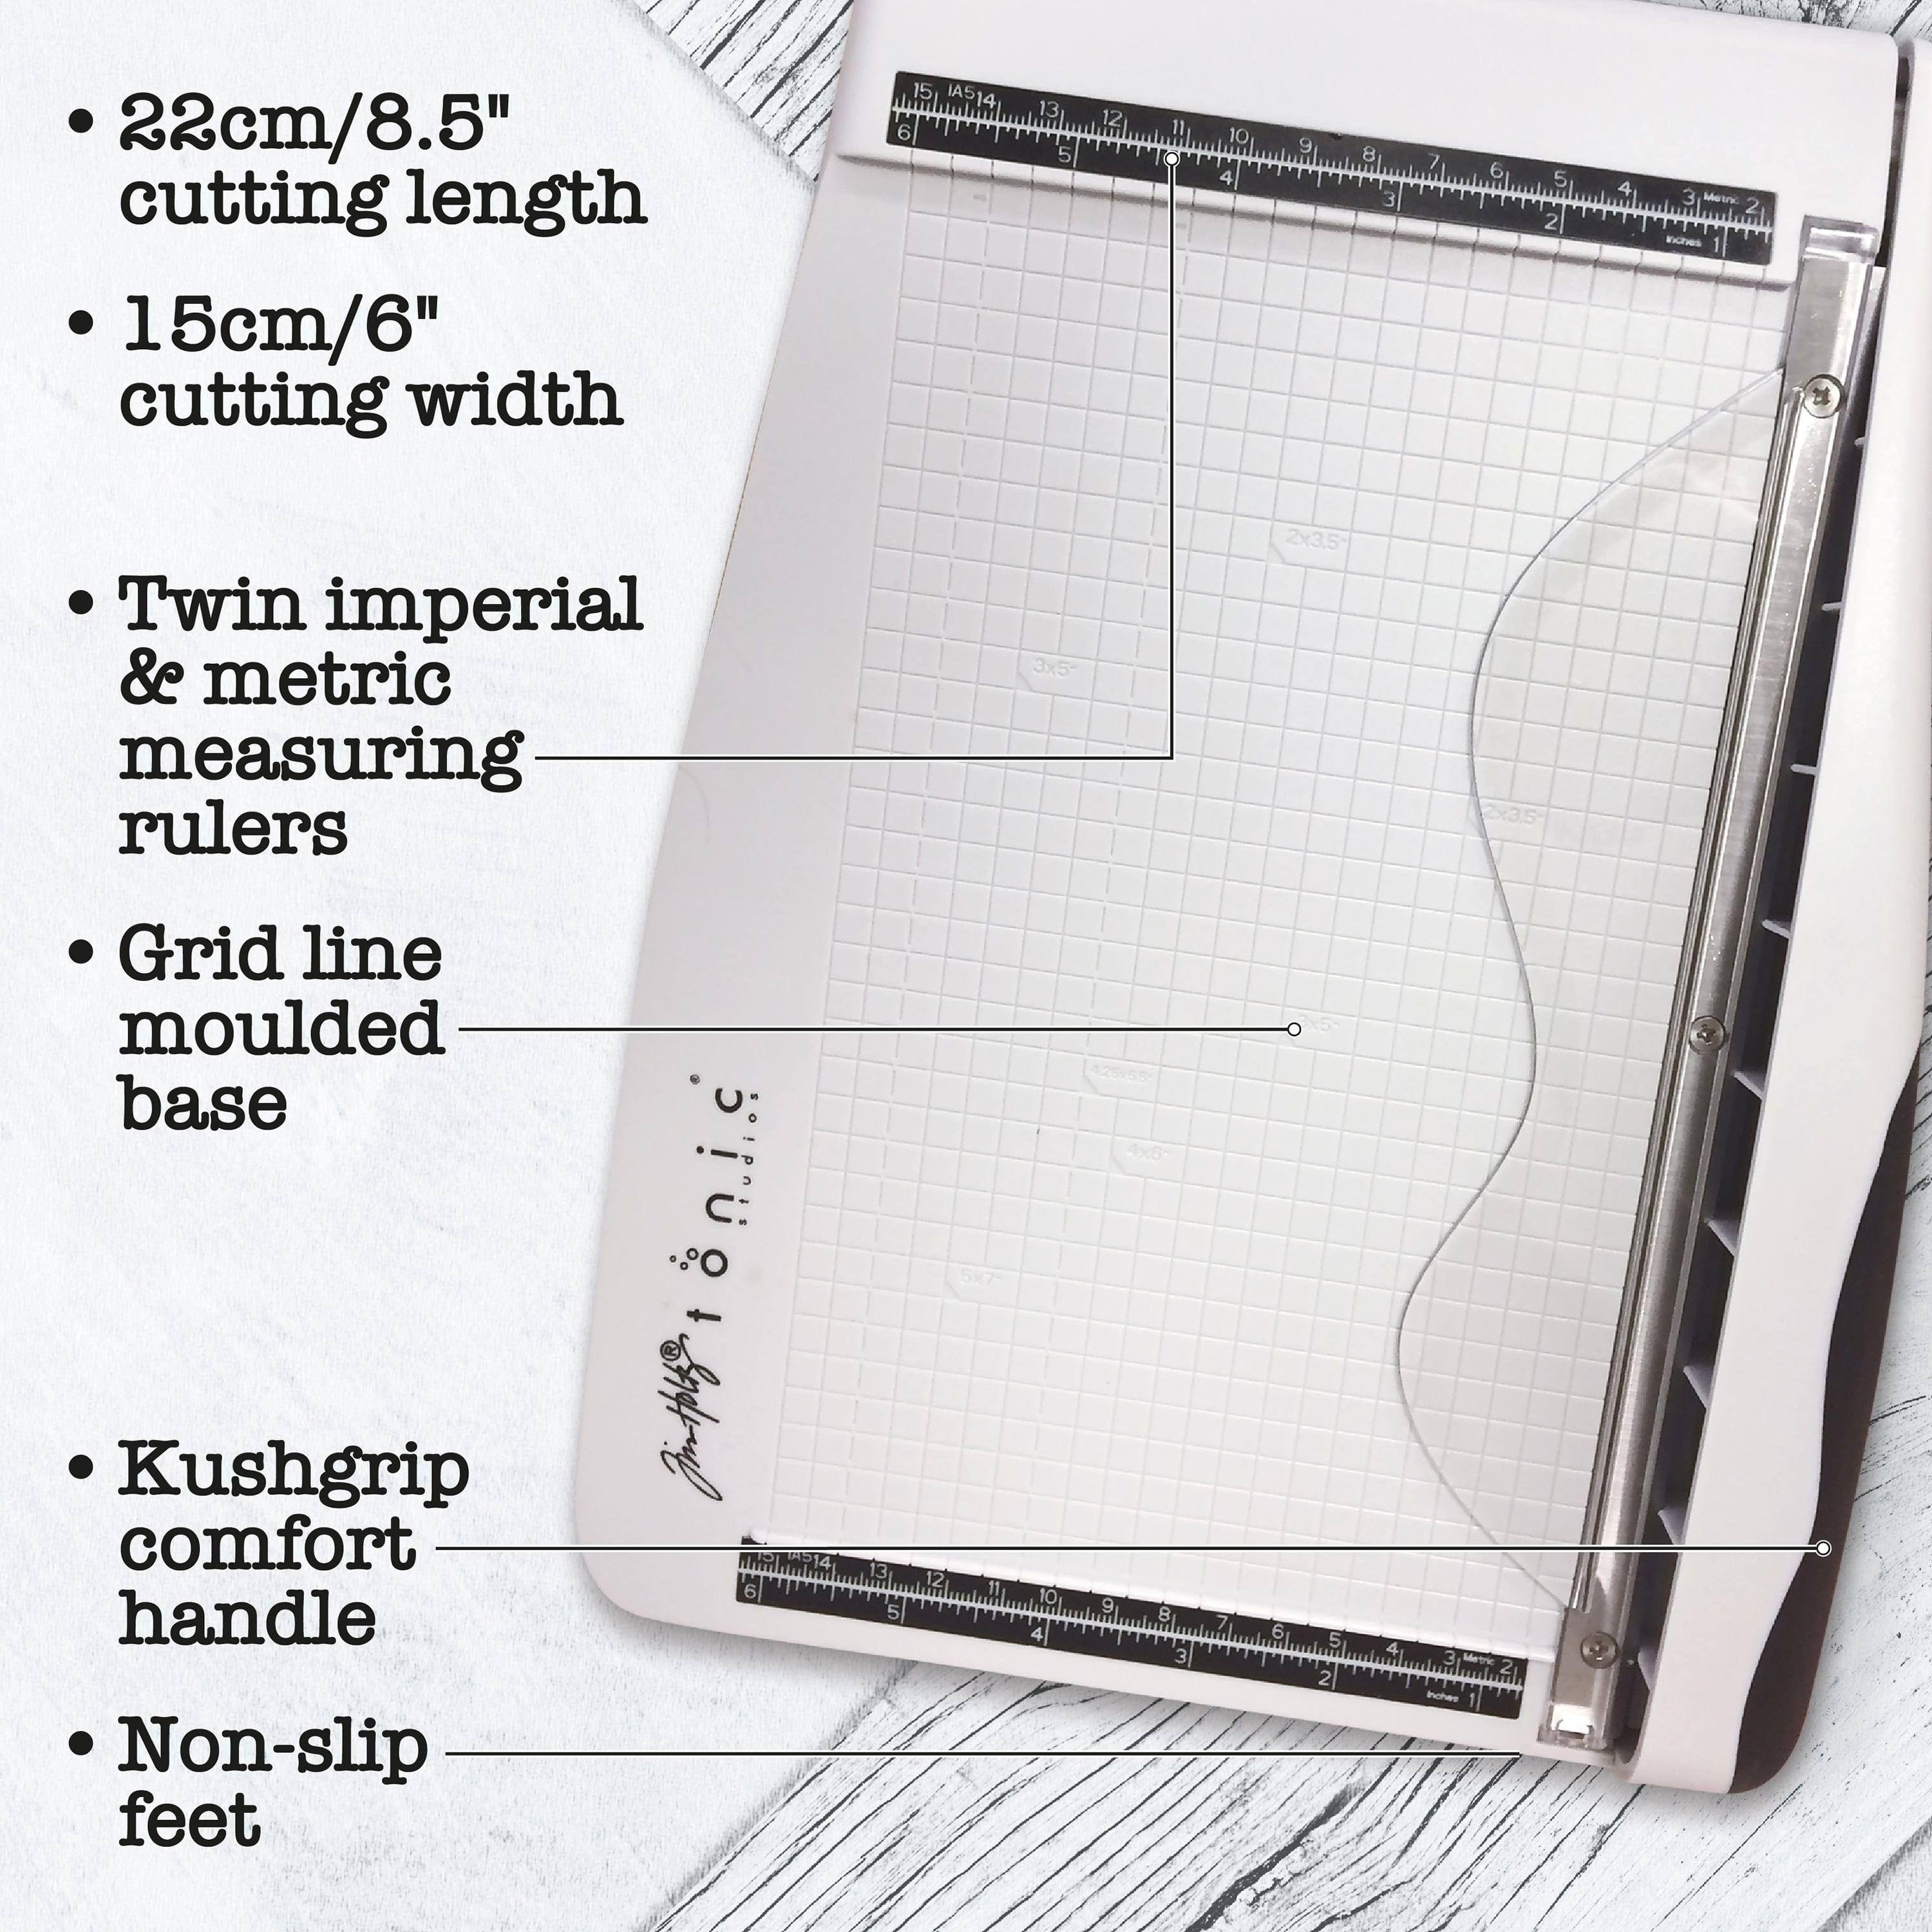 Tips for the Tim Holtz Rotary Trimmer by Tonic 